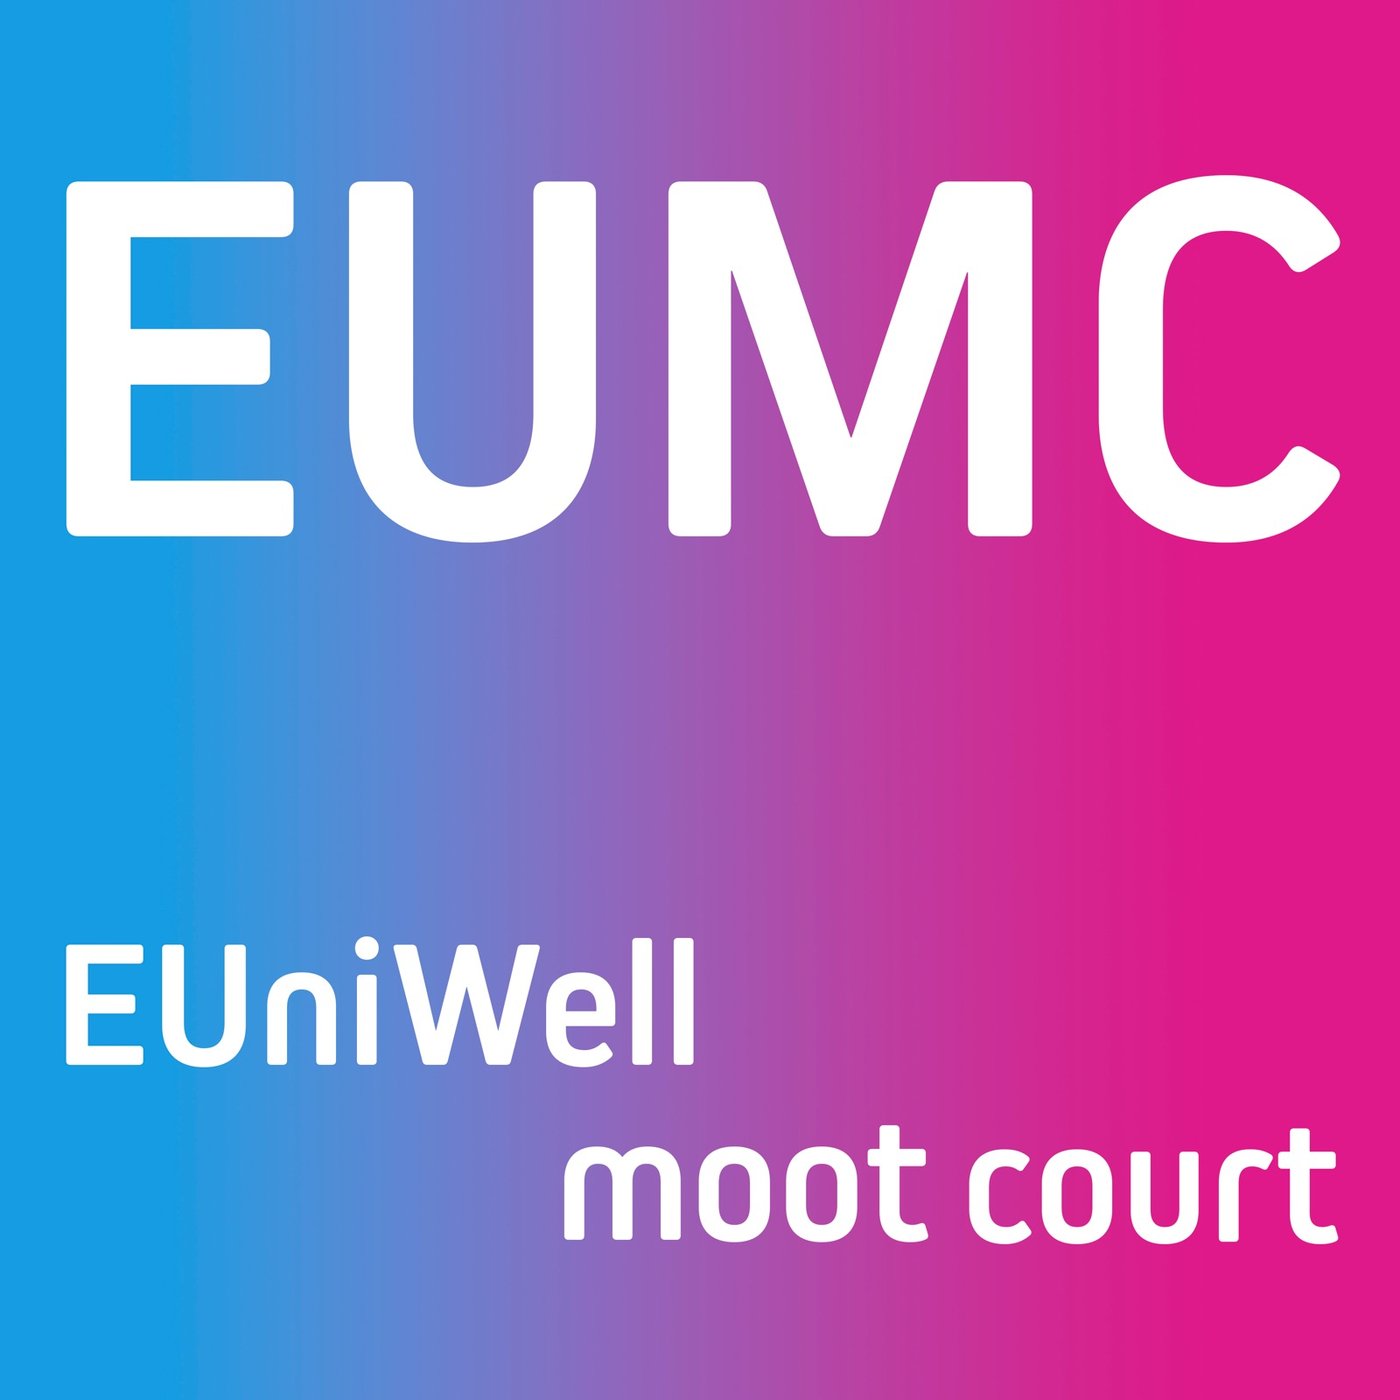 The graphic shows the text "EUMC - EUniWell moot court" in front of a cyan and pink gradient.